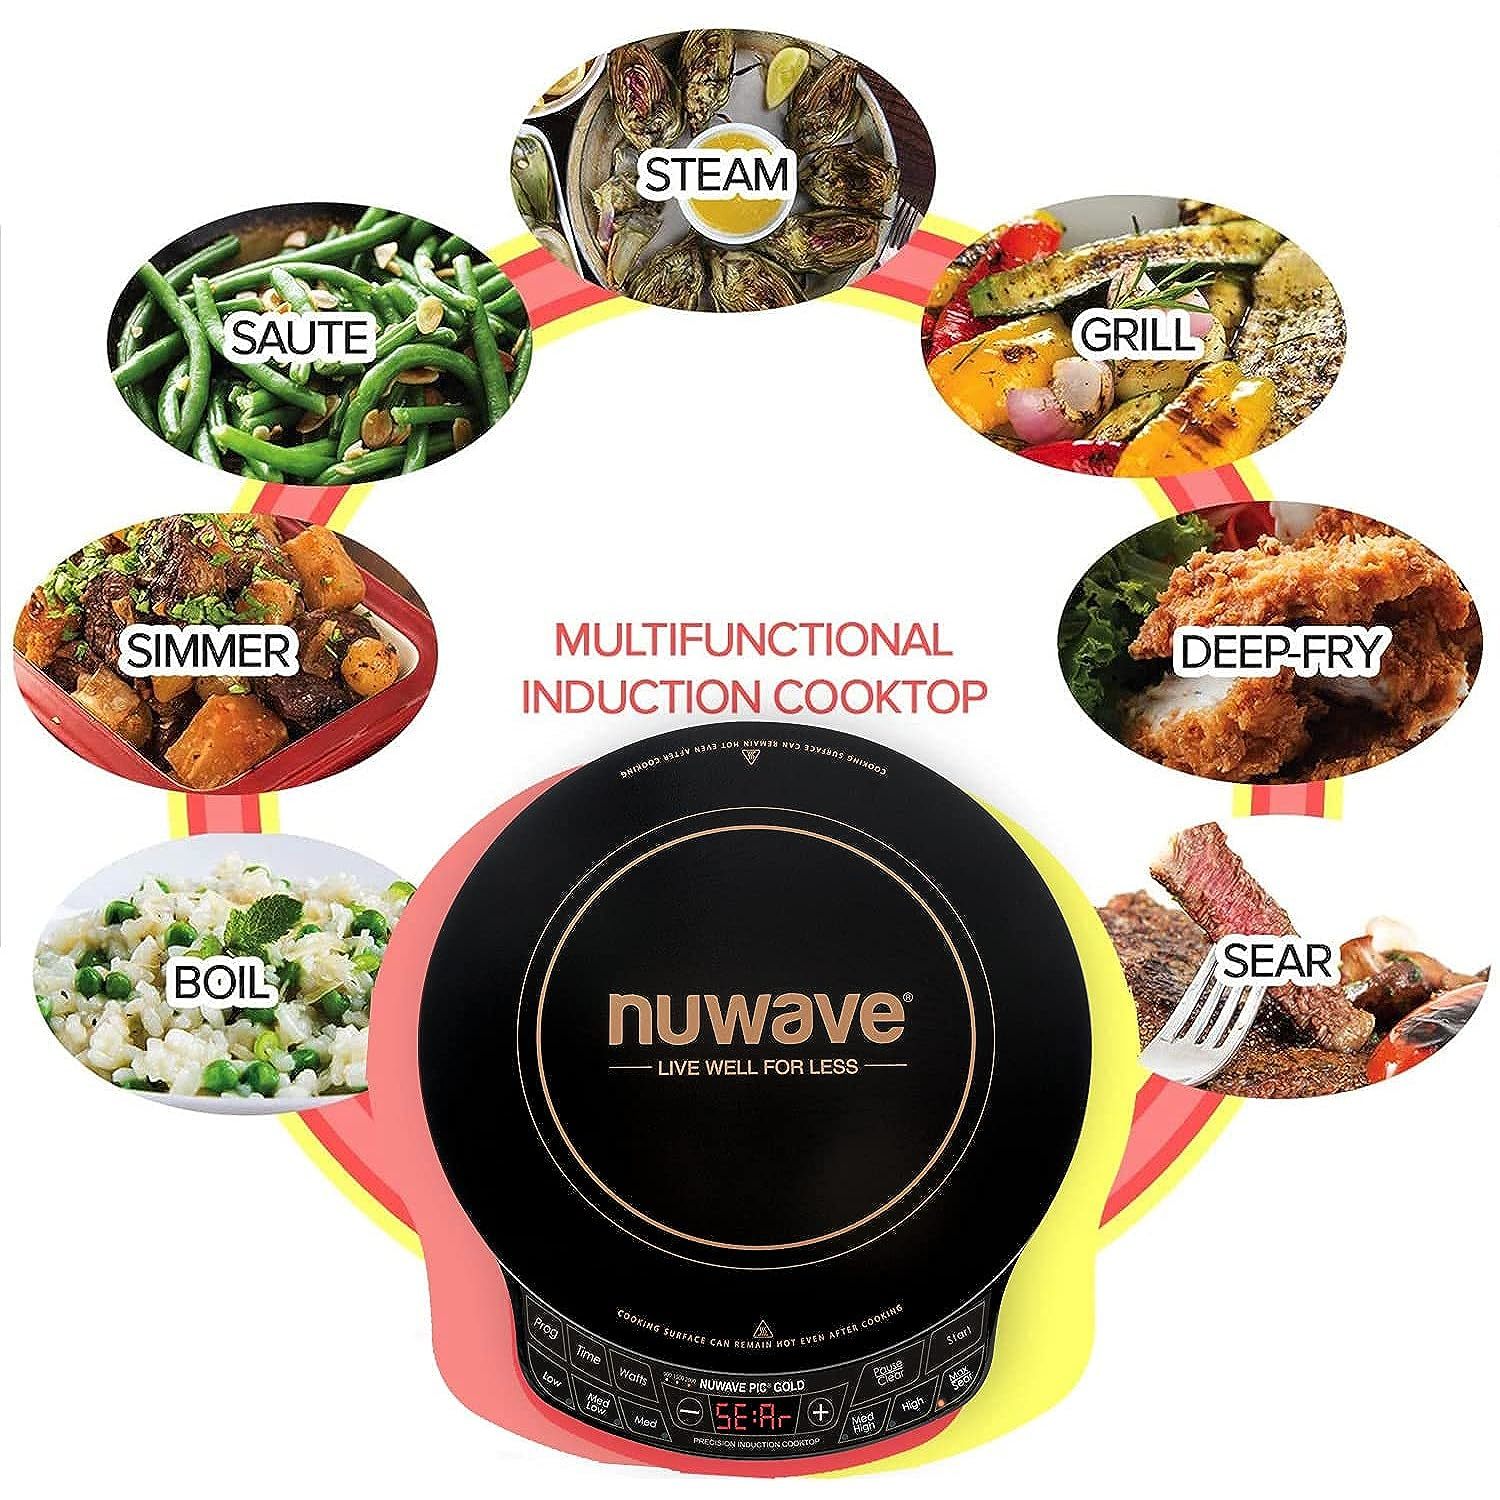 Home Pro Portable Induction Cooktop RWT0095 - 1800W (120V) Countertop Induction